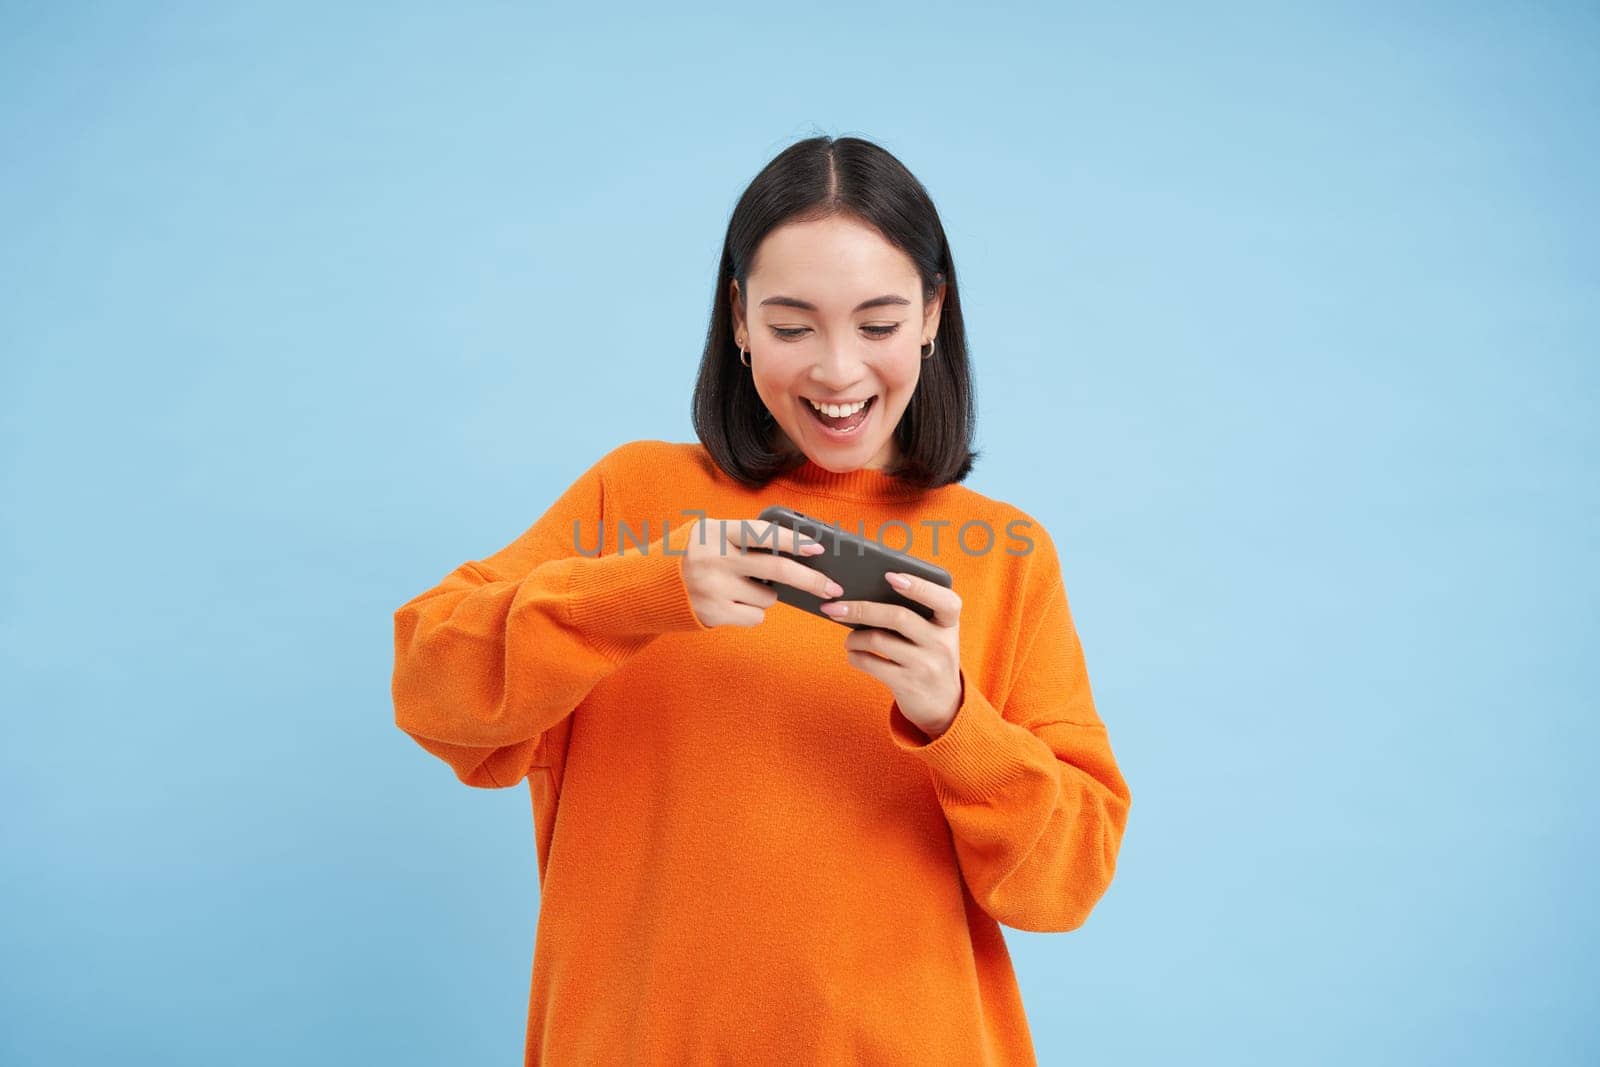 Happy smiling girl, 25 years, plays mobile video games, holds smartphone in both hands, stands against blue background.